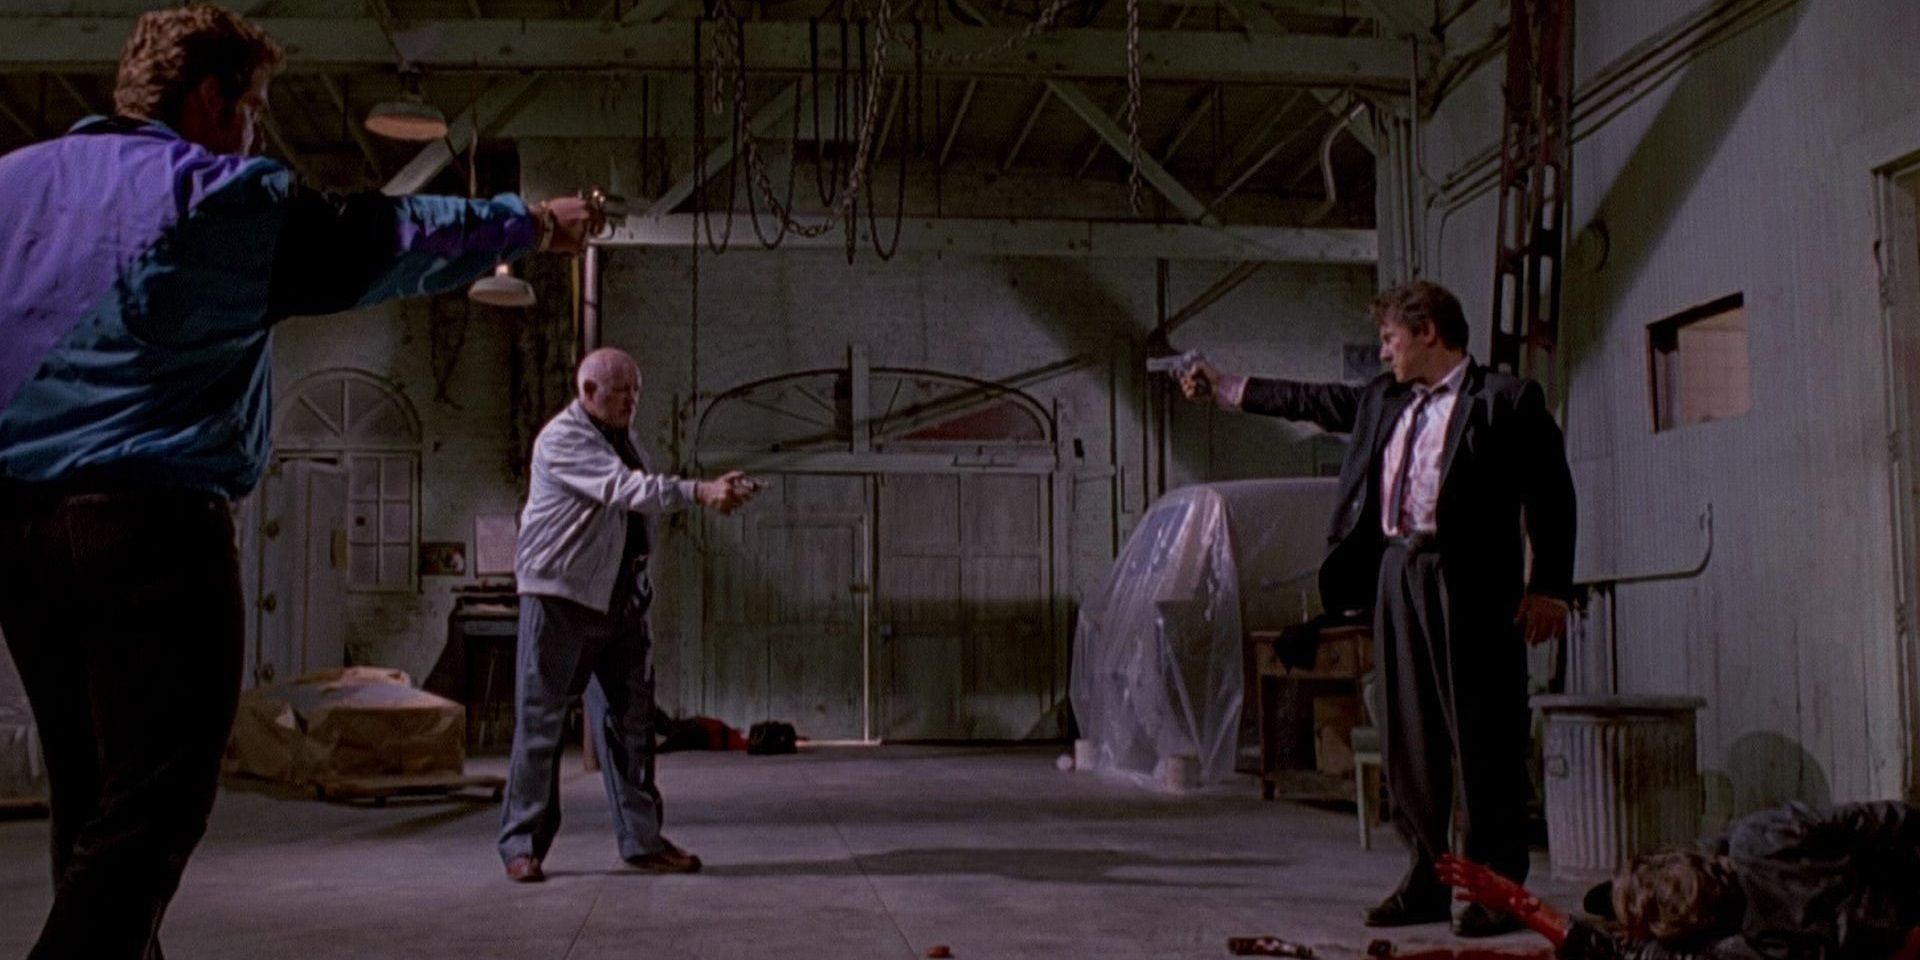 The armed standoff at the end of Reservoir Dogs